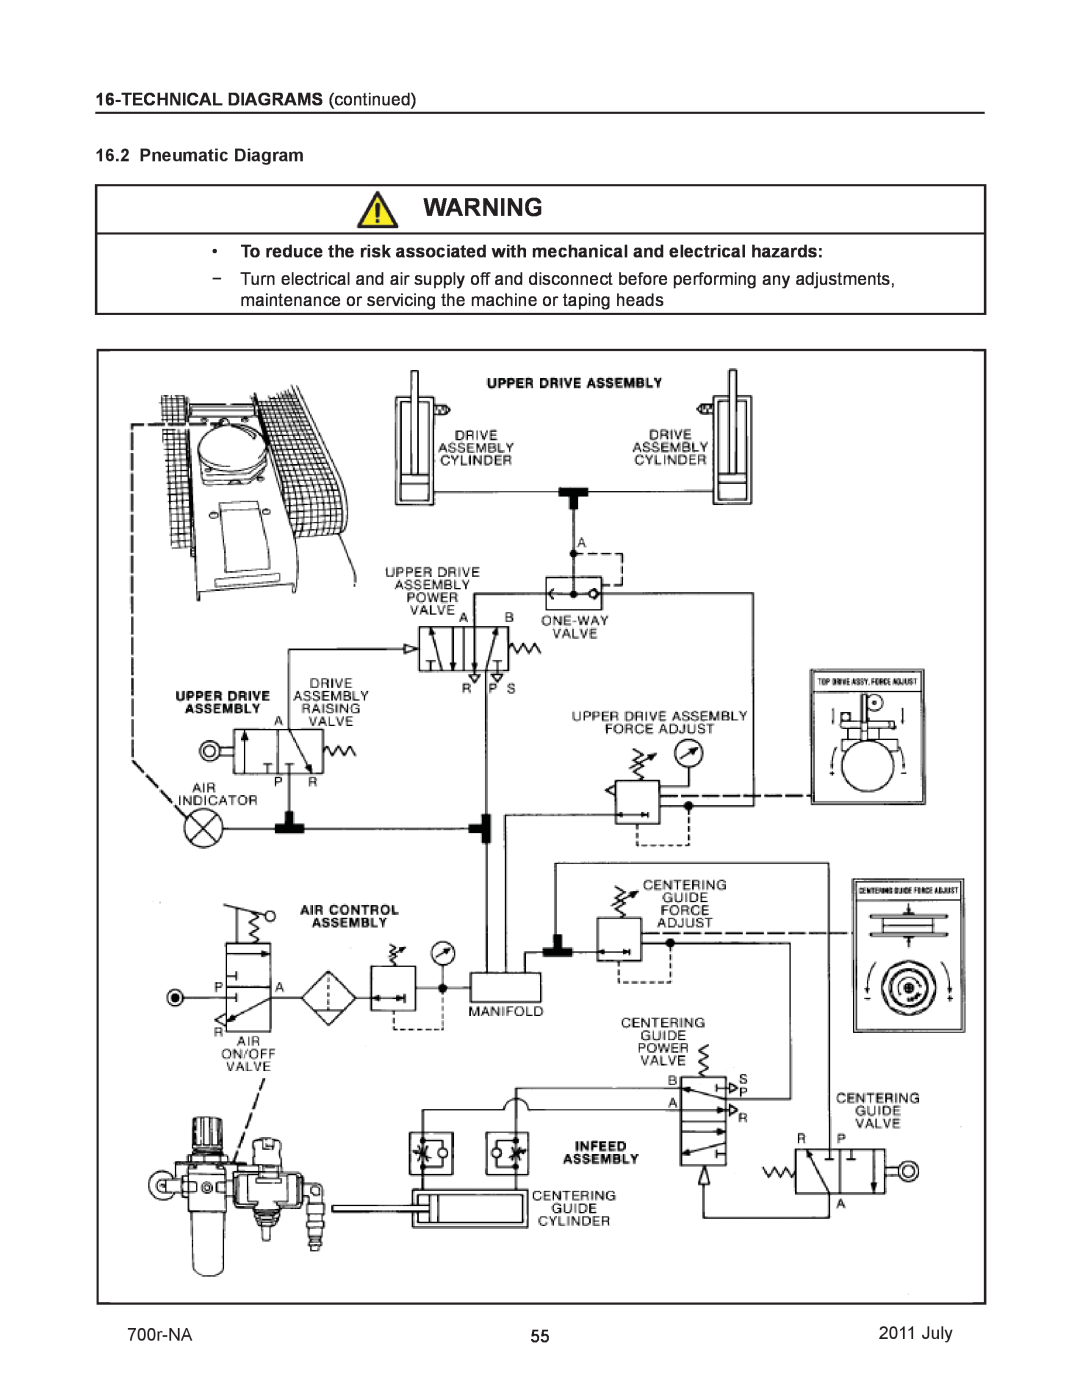 3M 40800 operating instructions TECHNICALDIAGRAMS continued, Pneumatic Diagram, 700r-NA, July 